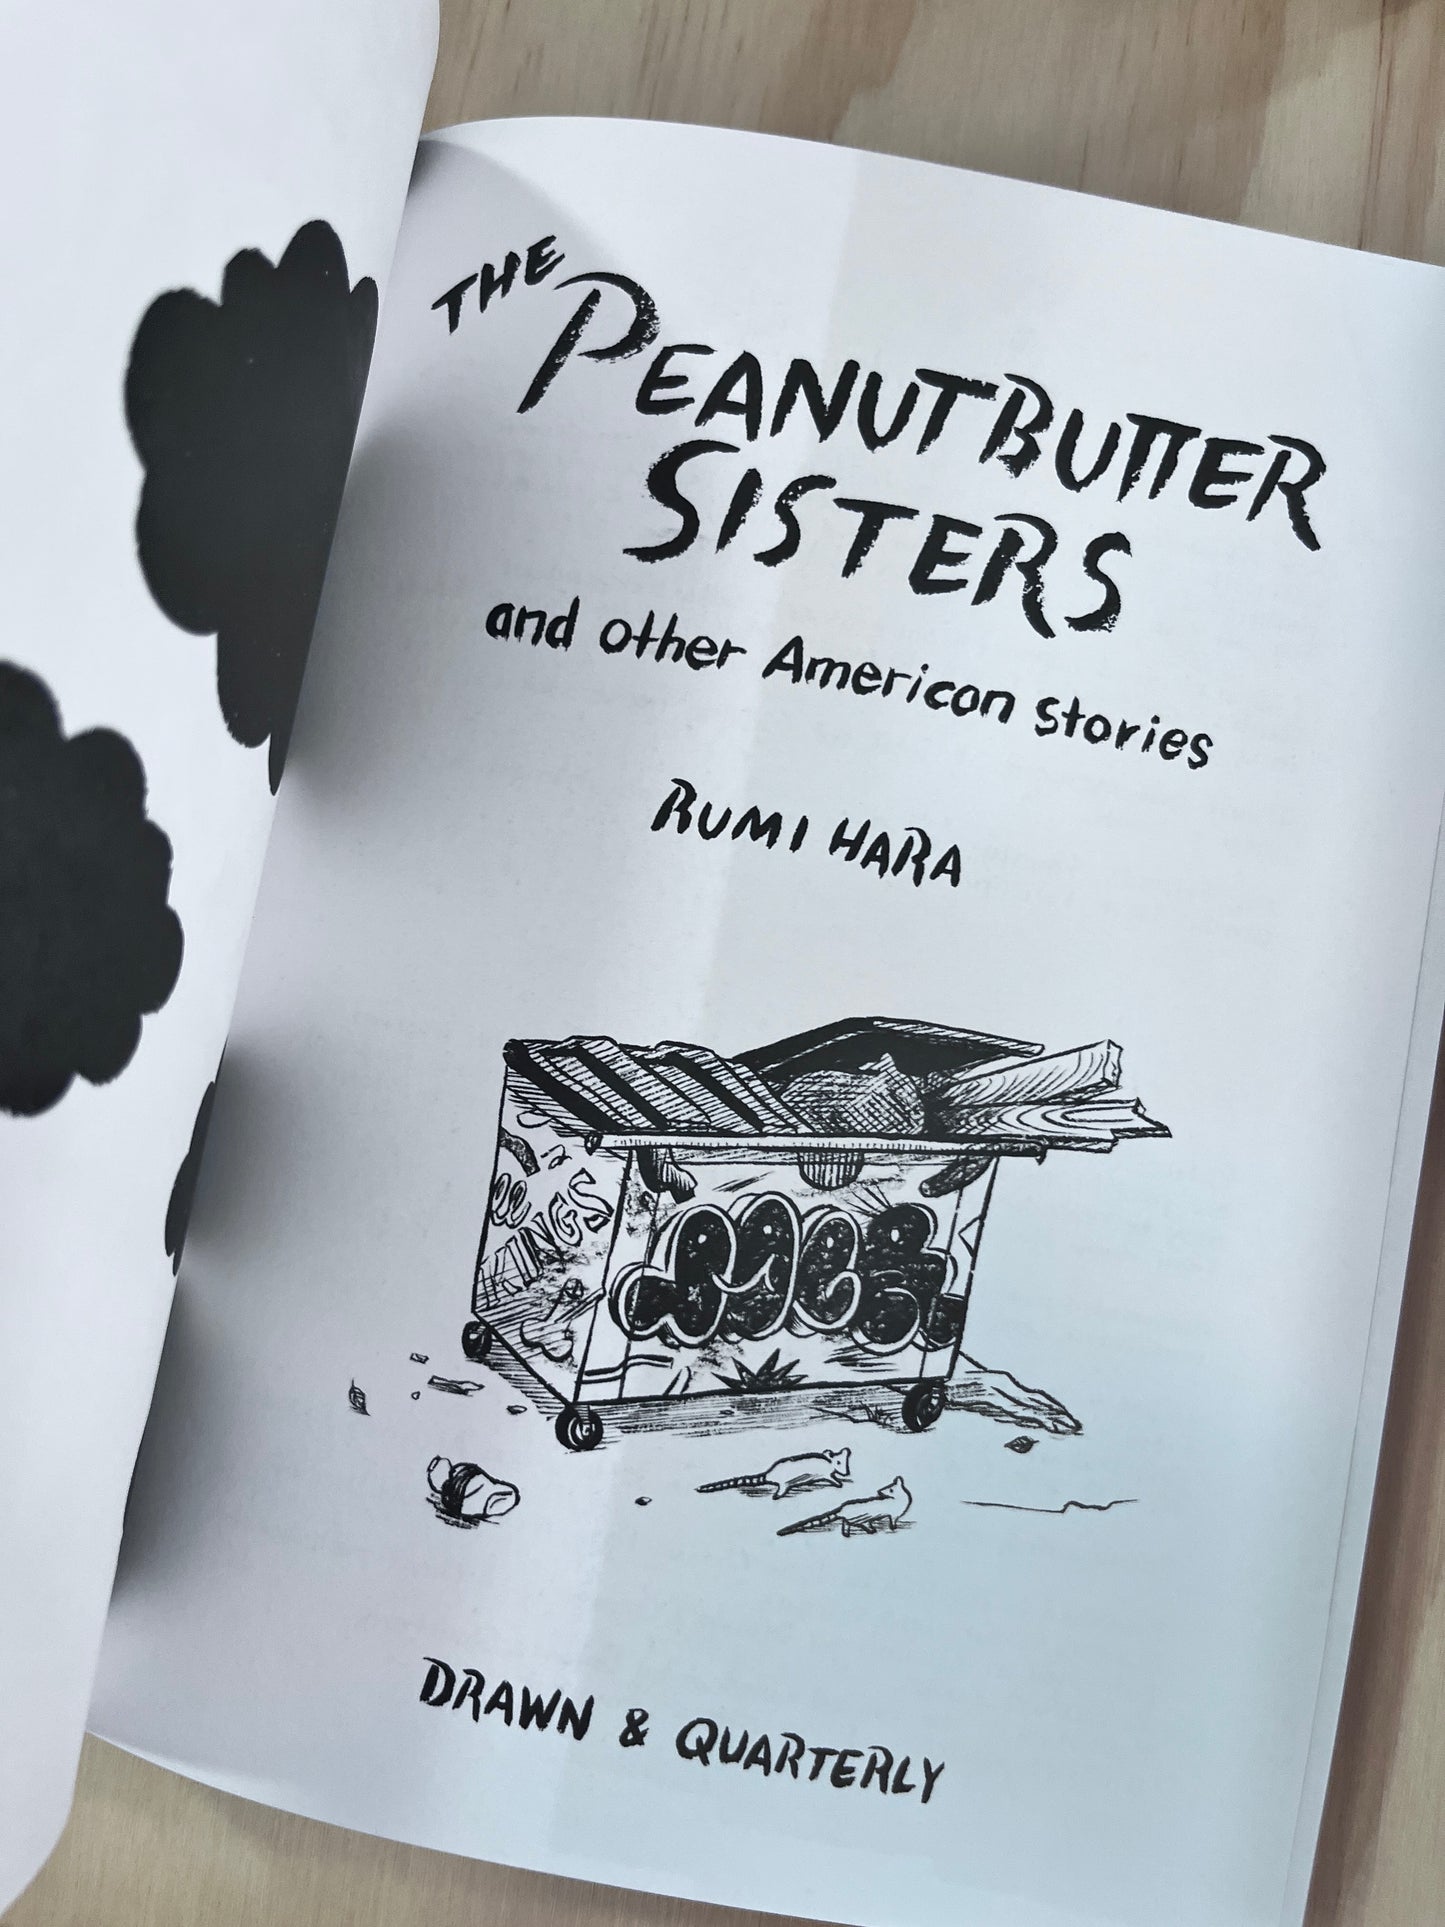 The Peanutbutter Sisters and Other American Stories